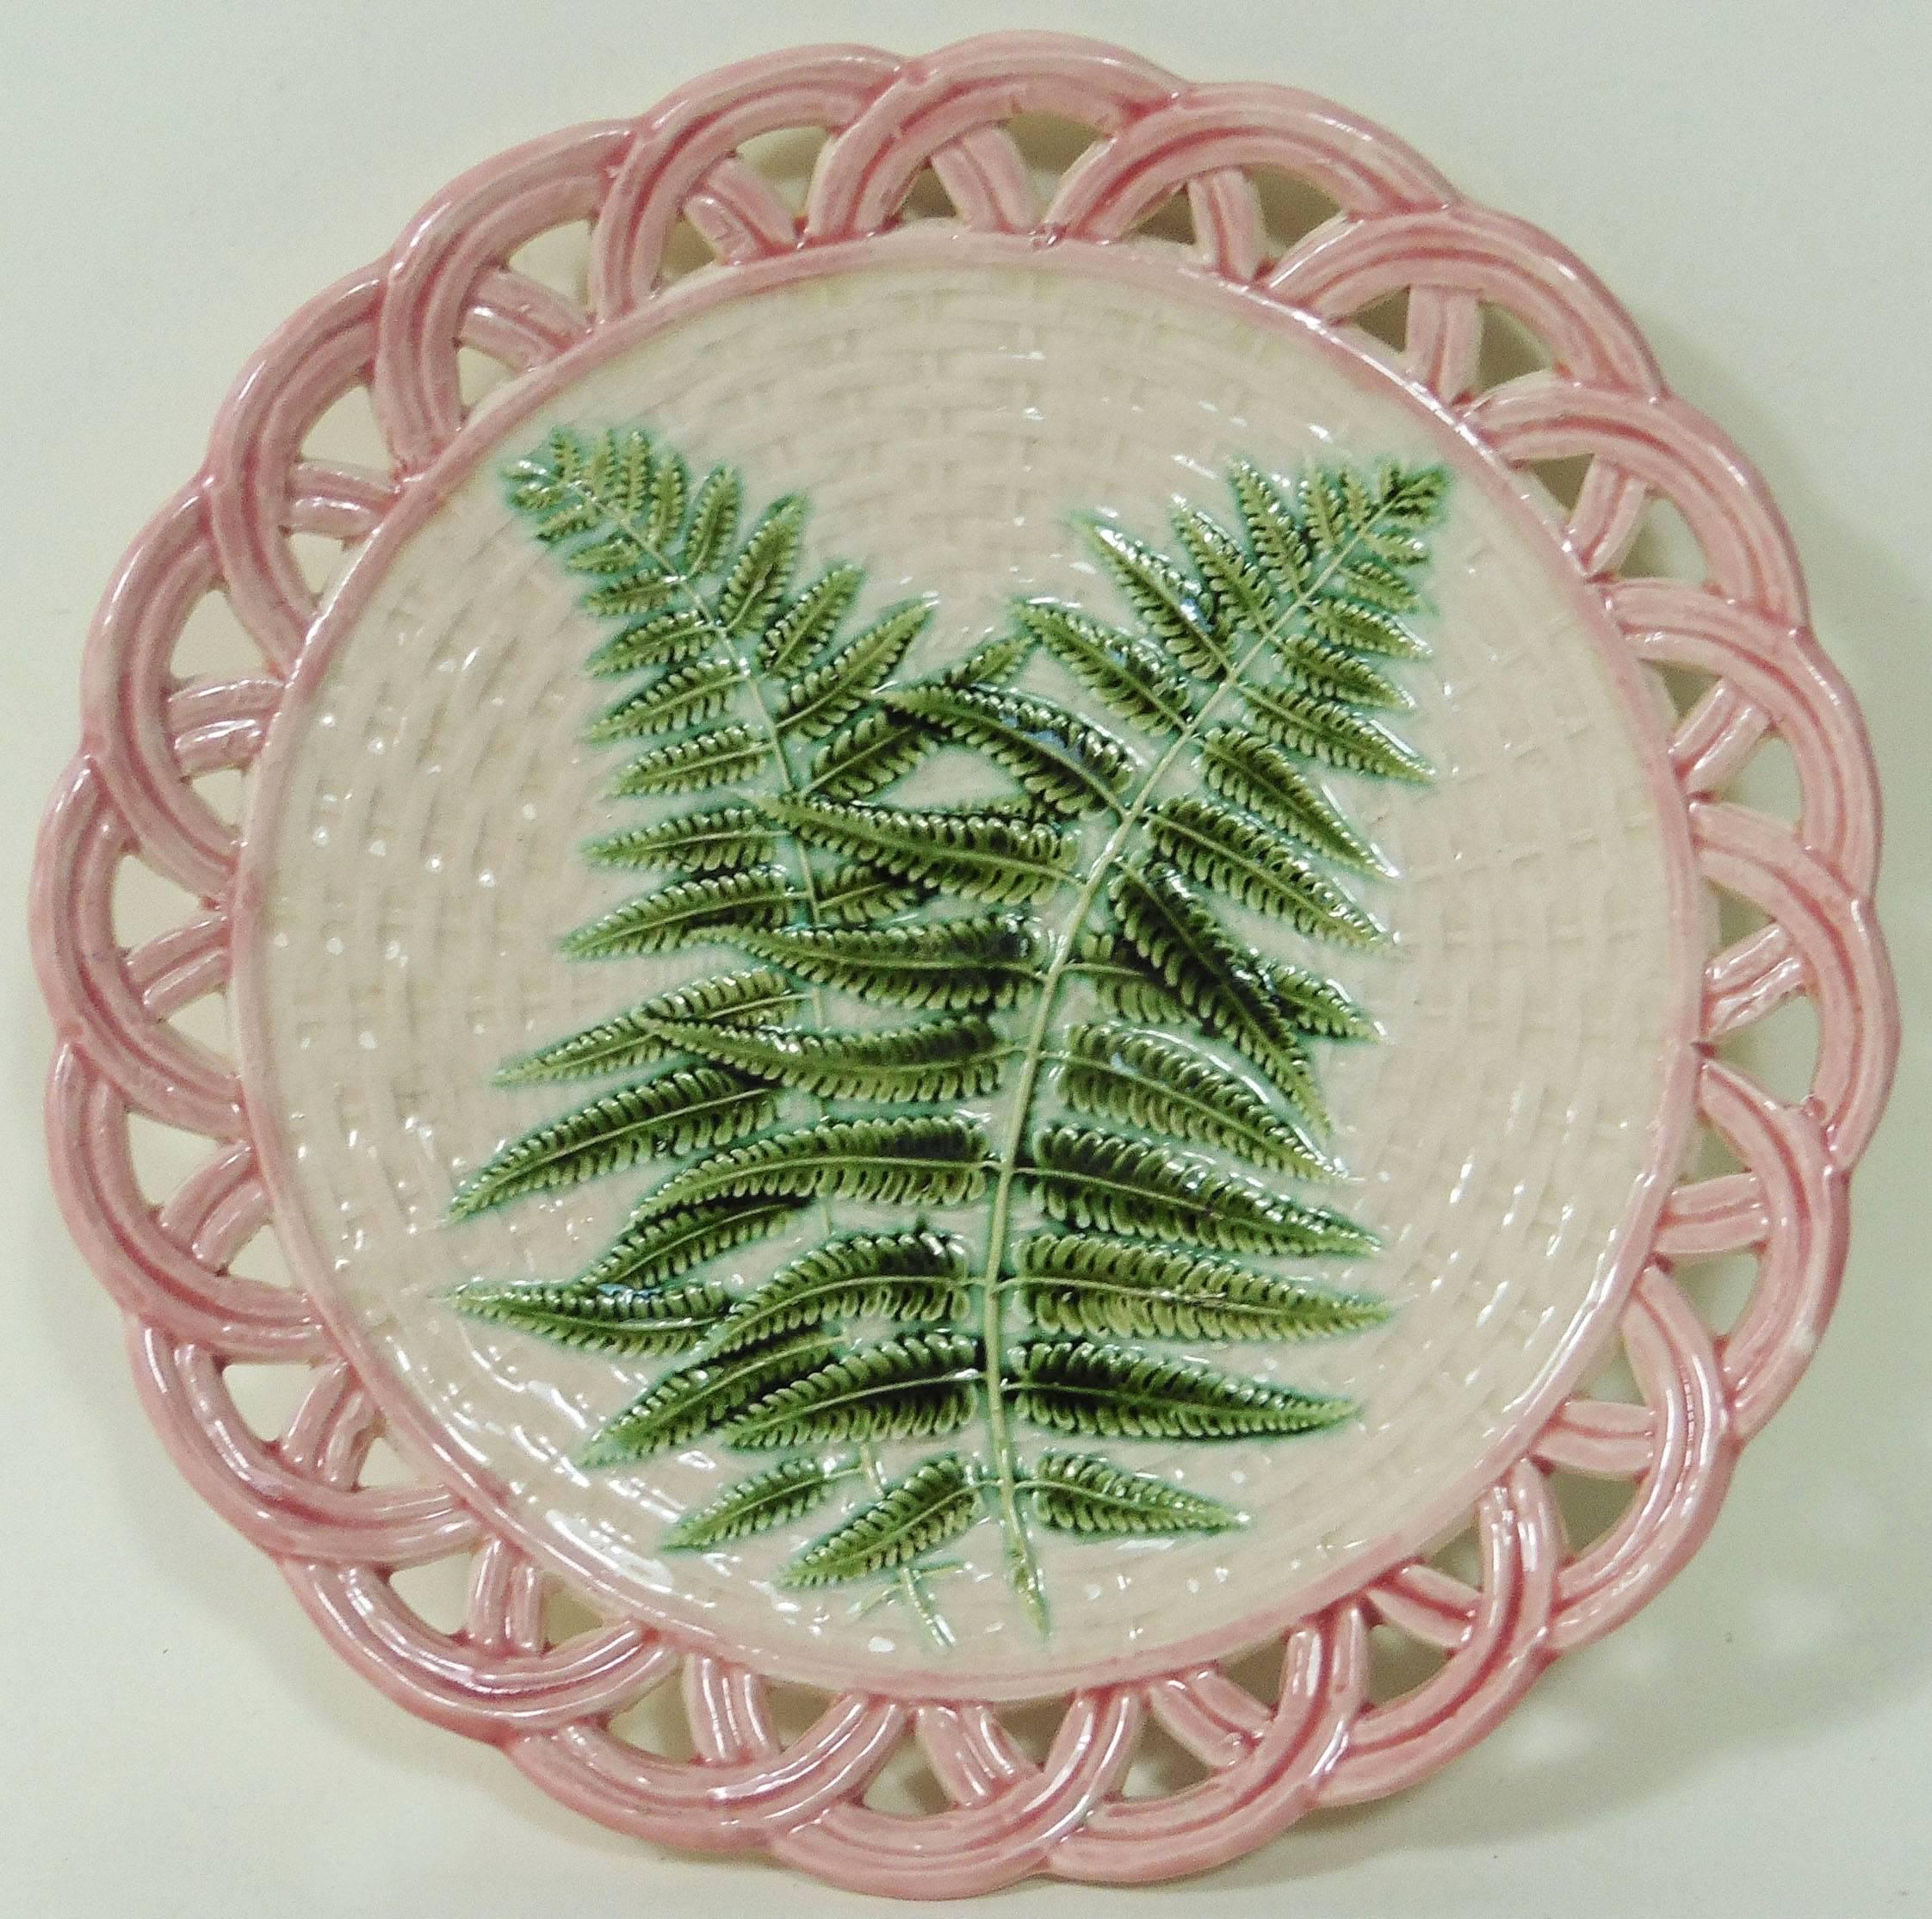 French 19th Majolica reticulated plate signed Sarreguemines.
Decorated with larges ferns on a beige basketweave background, delicate pink reticulated border.